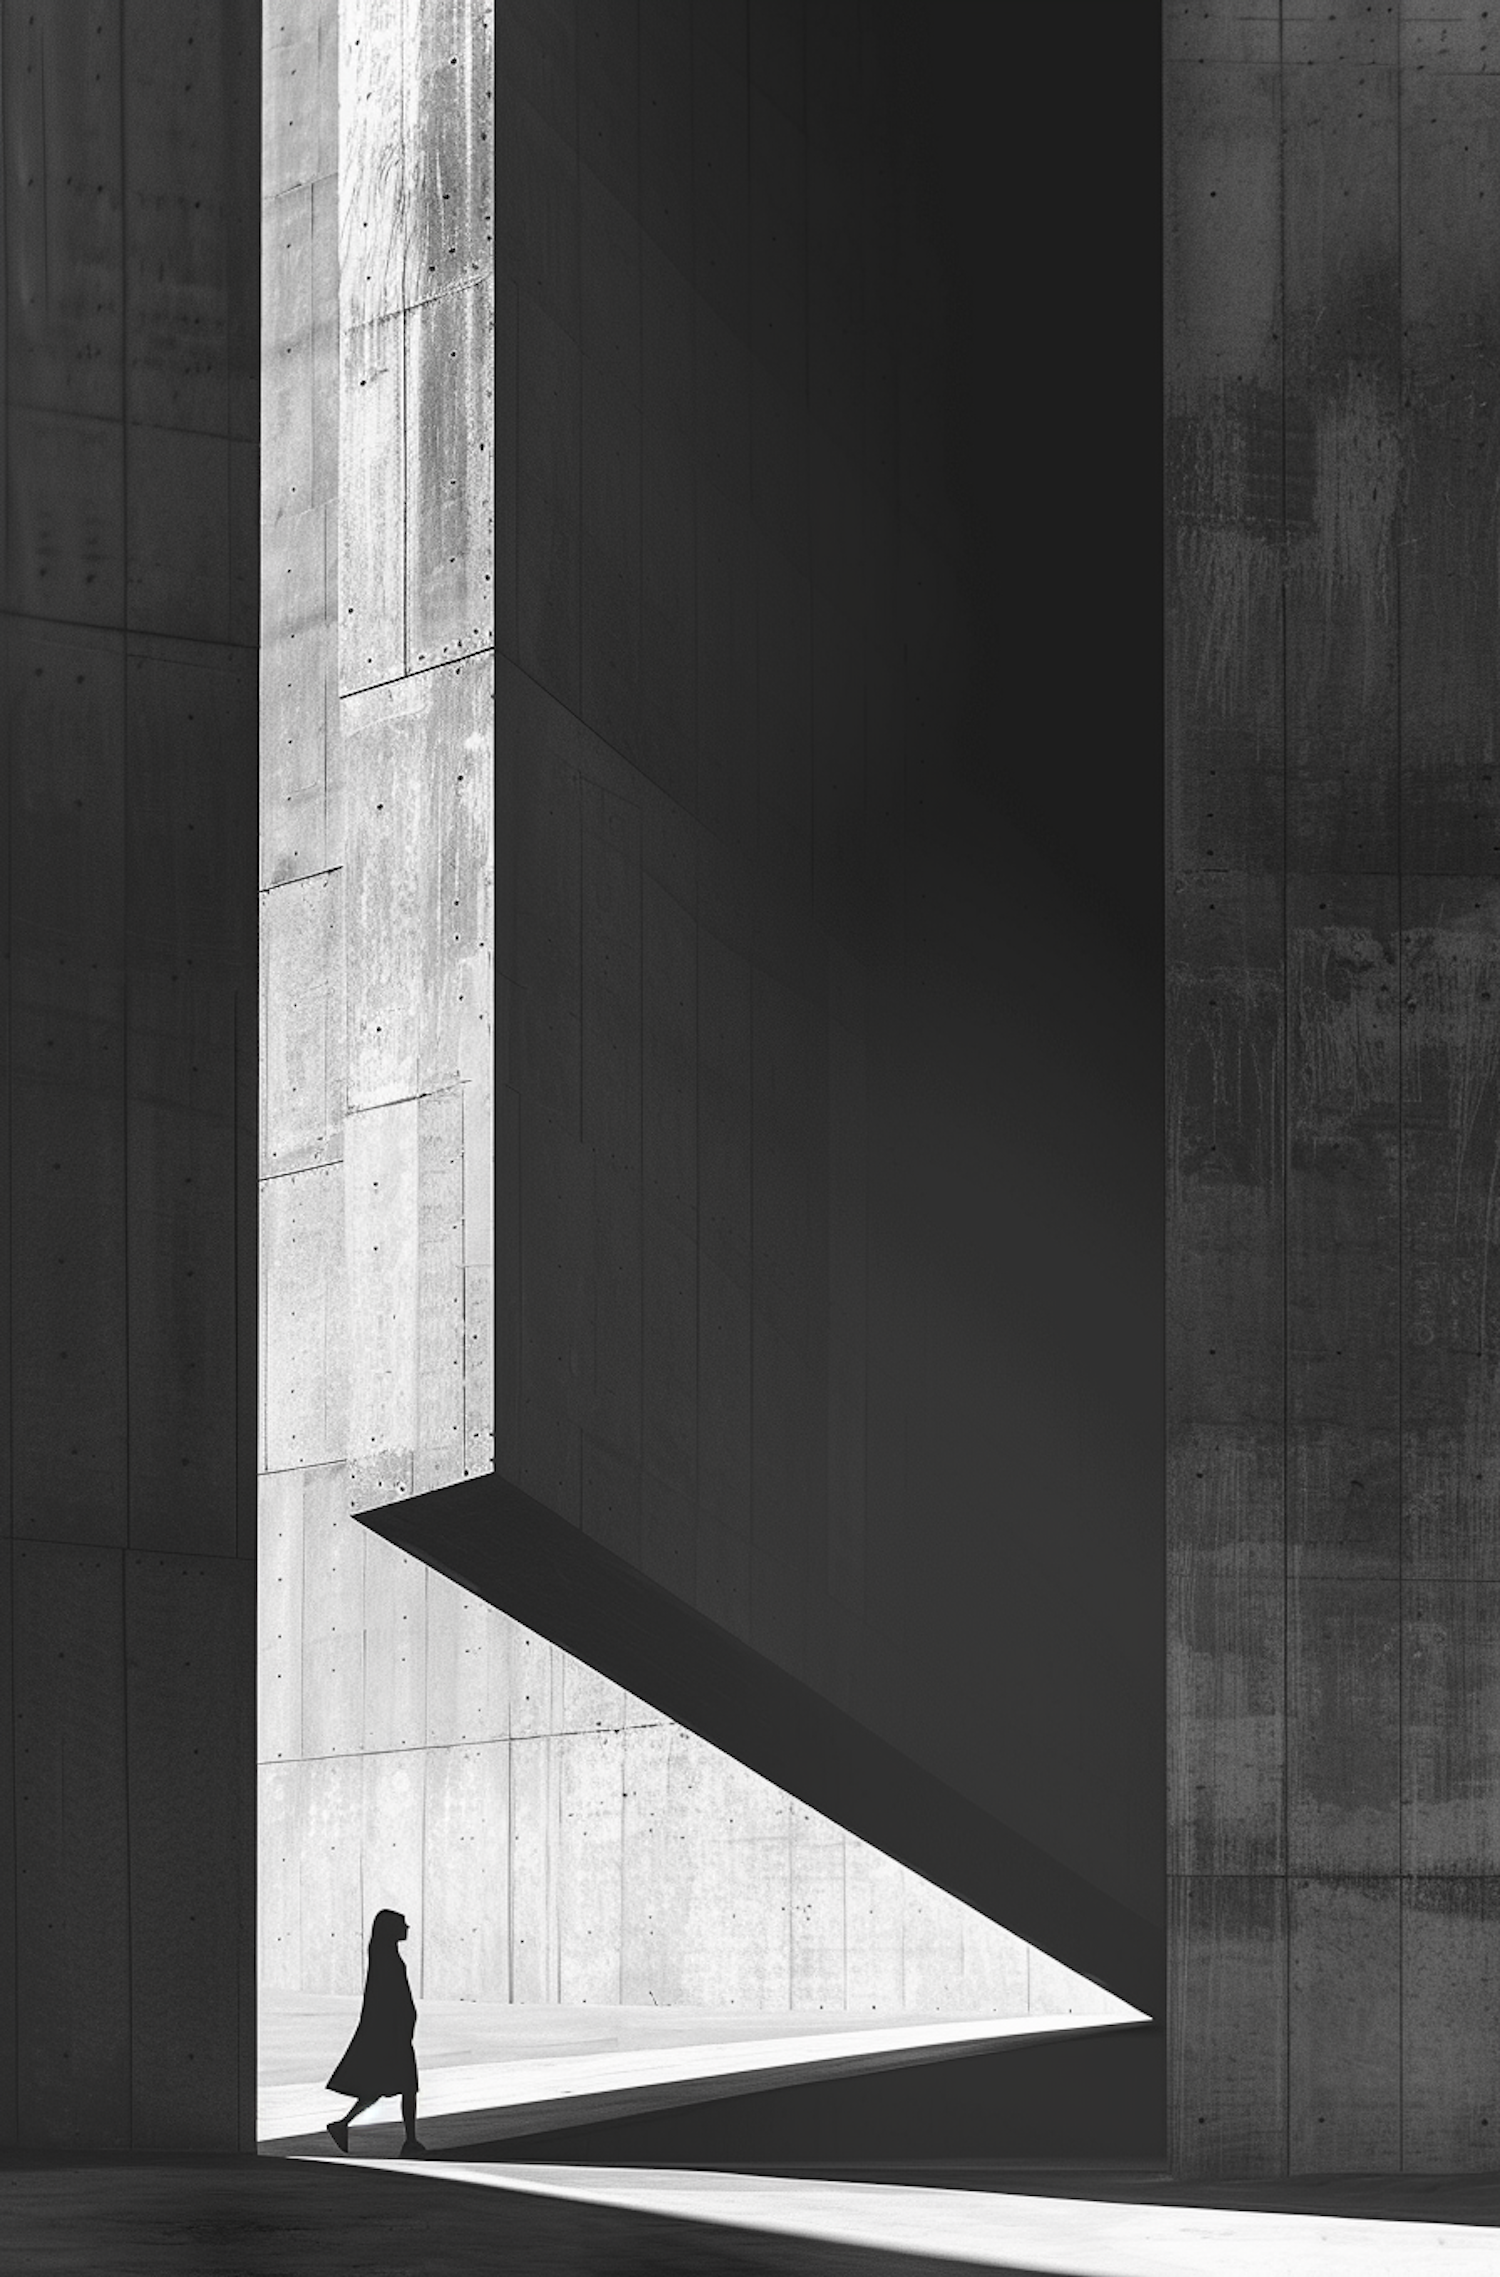 Minimalist Geometric Forms in a Concrete Space